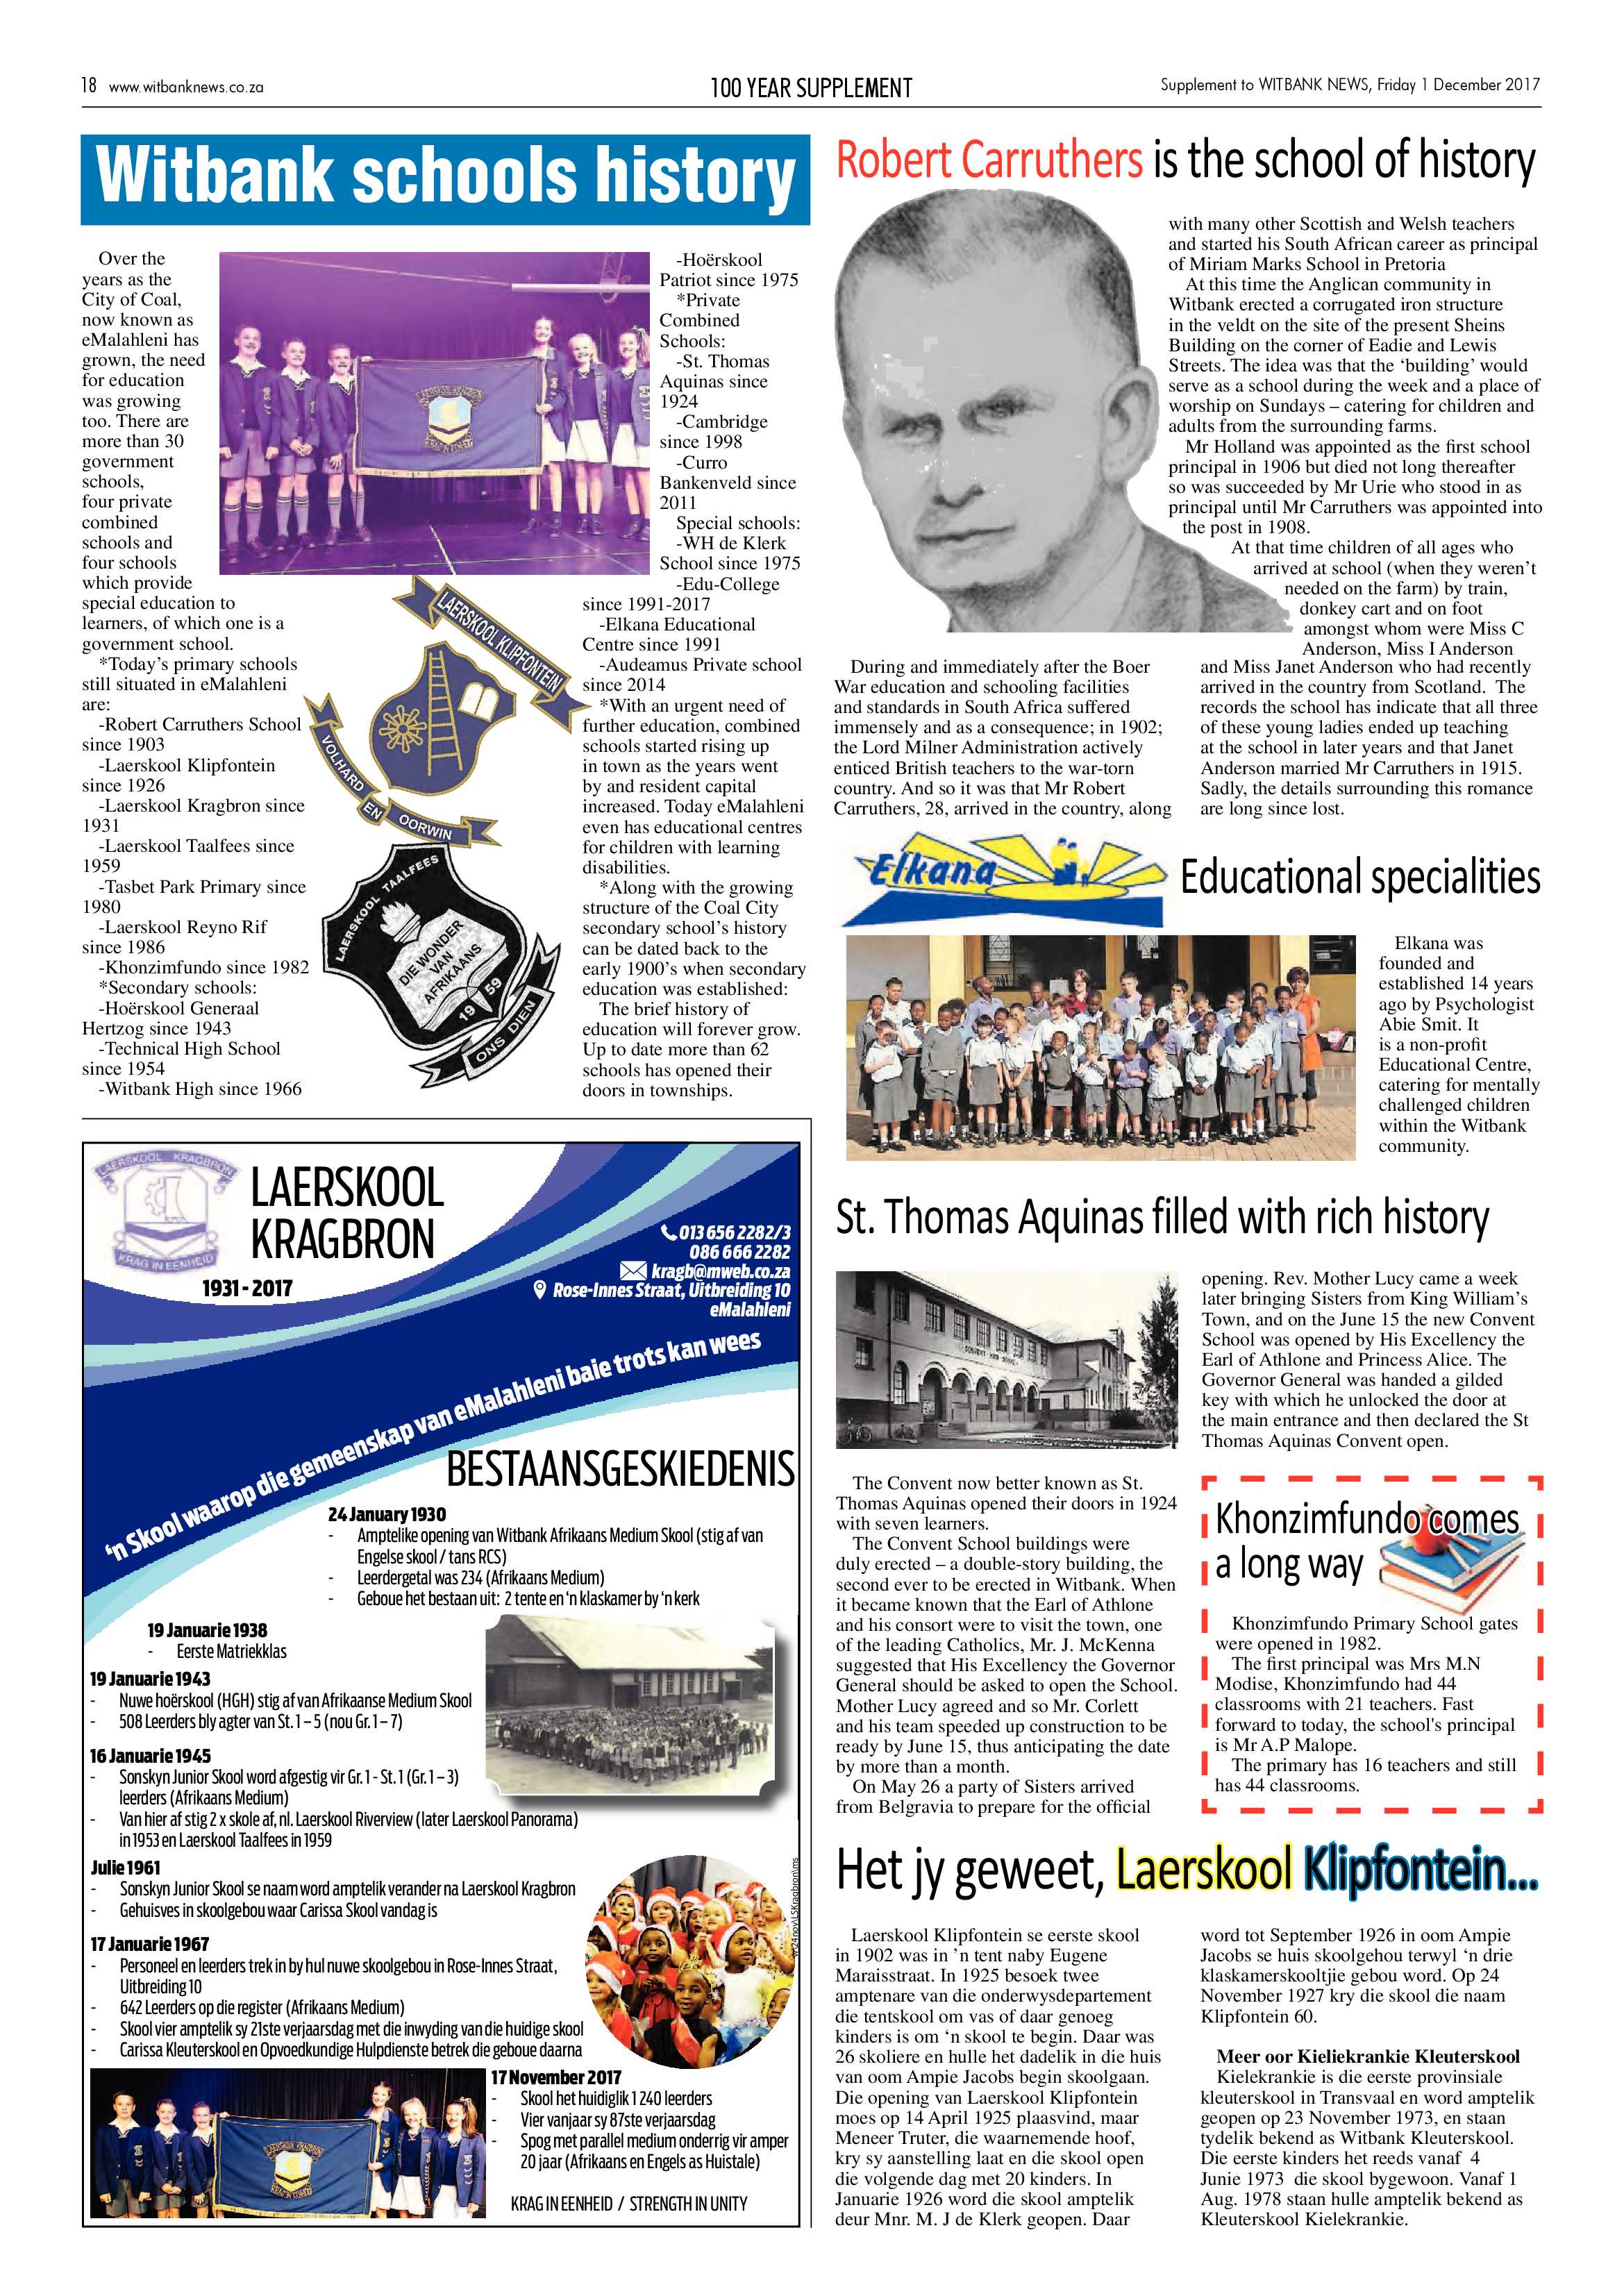 Witbank News 100 Year Supplement page 18